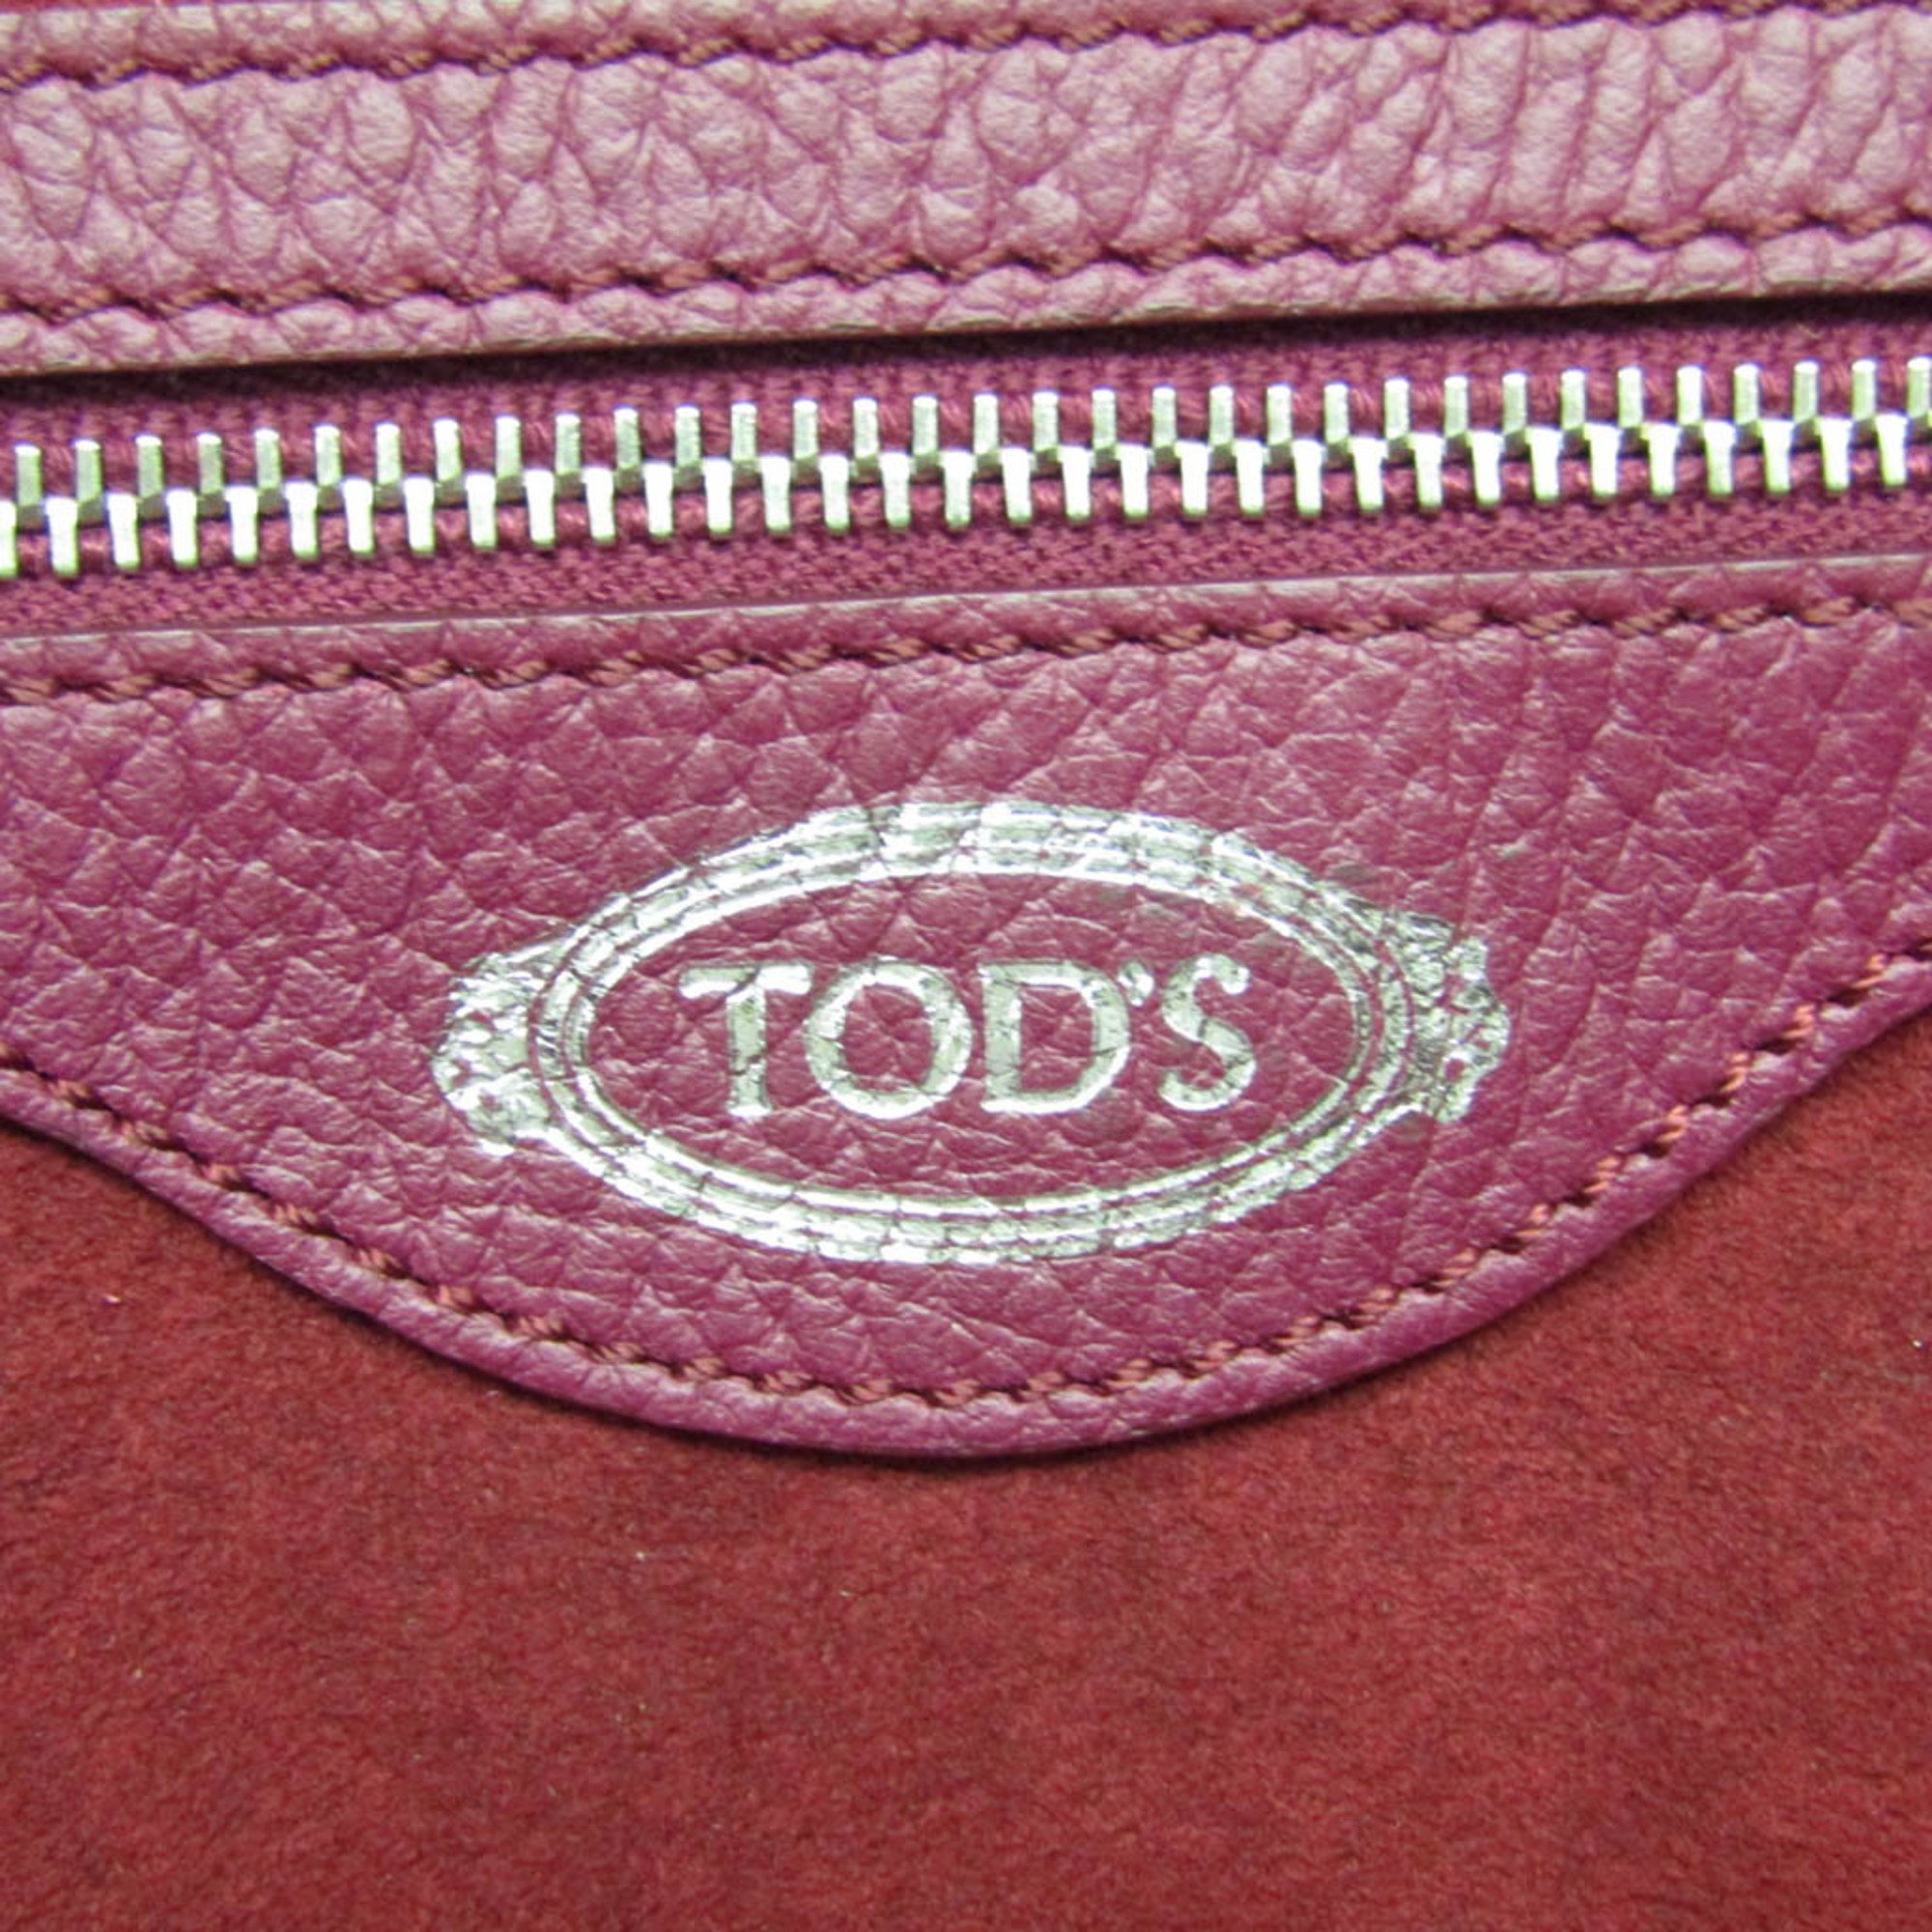 Tod's Gypsy Women's Leather Tote Bag Purple